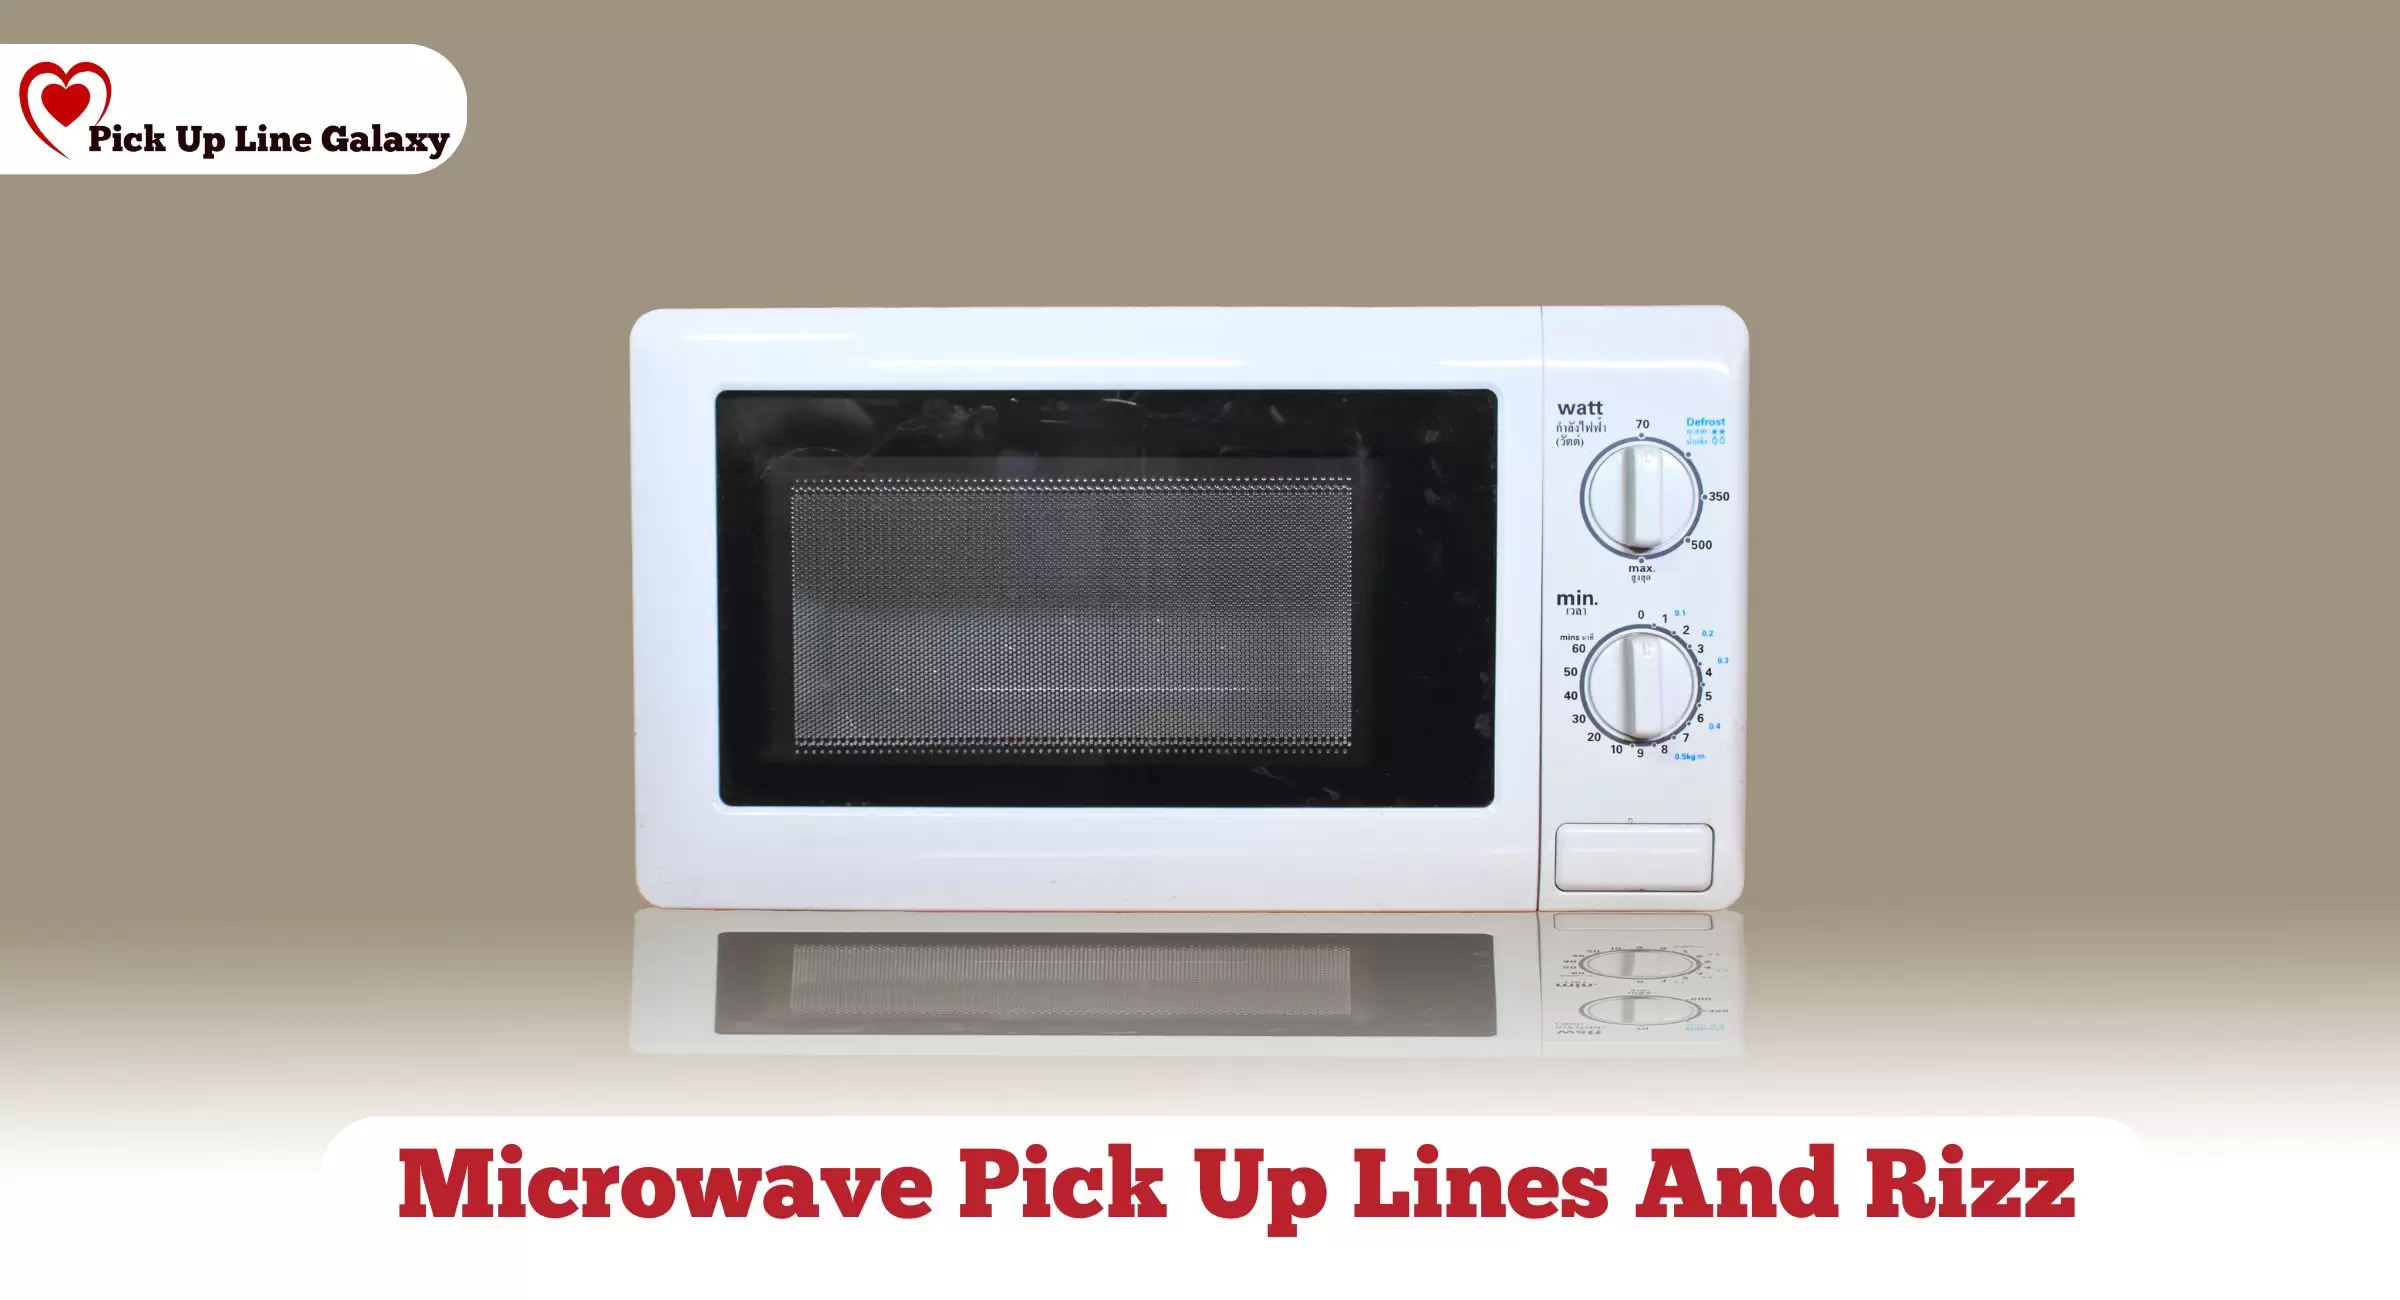 Microwave Pick Up Lines And Rizz